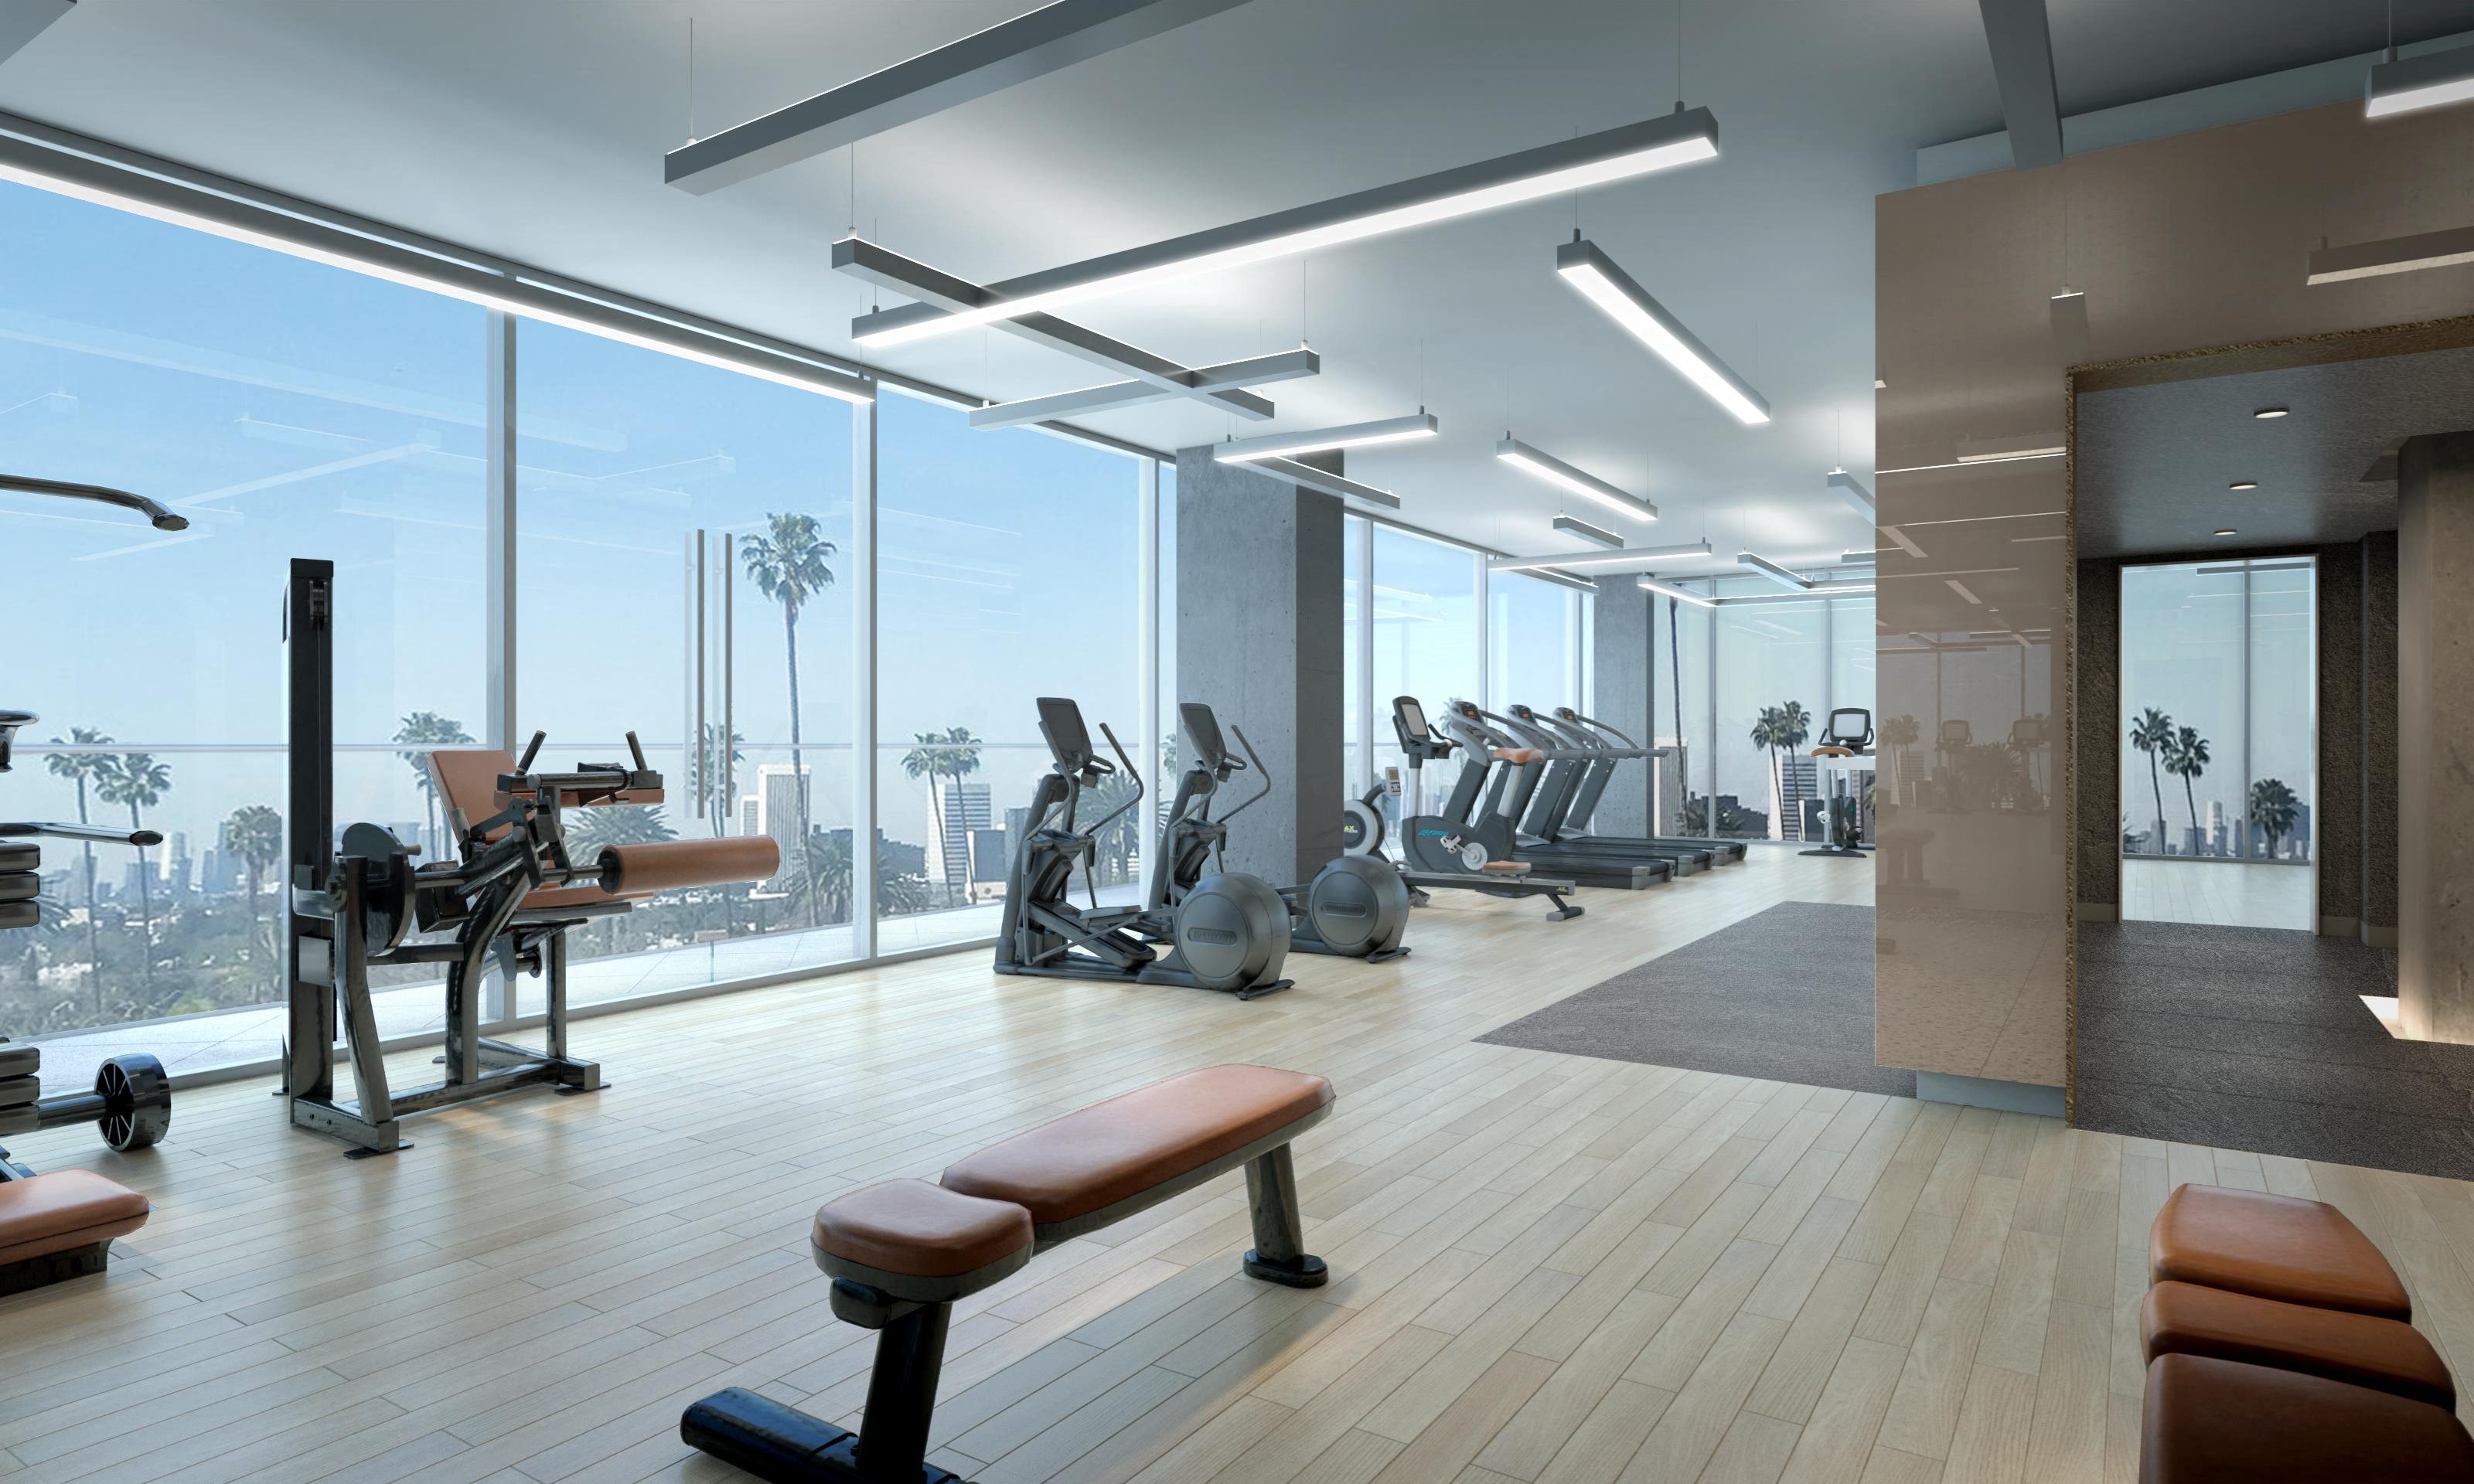 Beautiful Fitness Center with Technogym Equipment at Venue, California